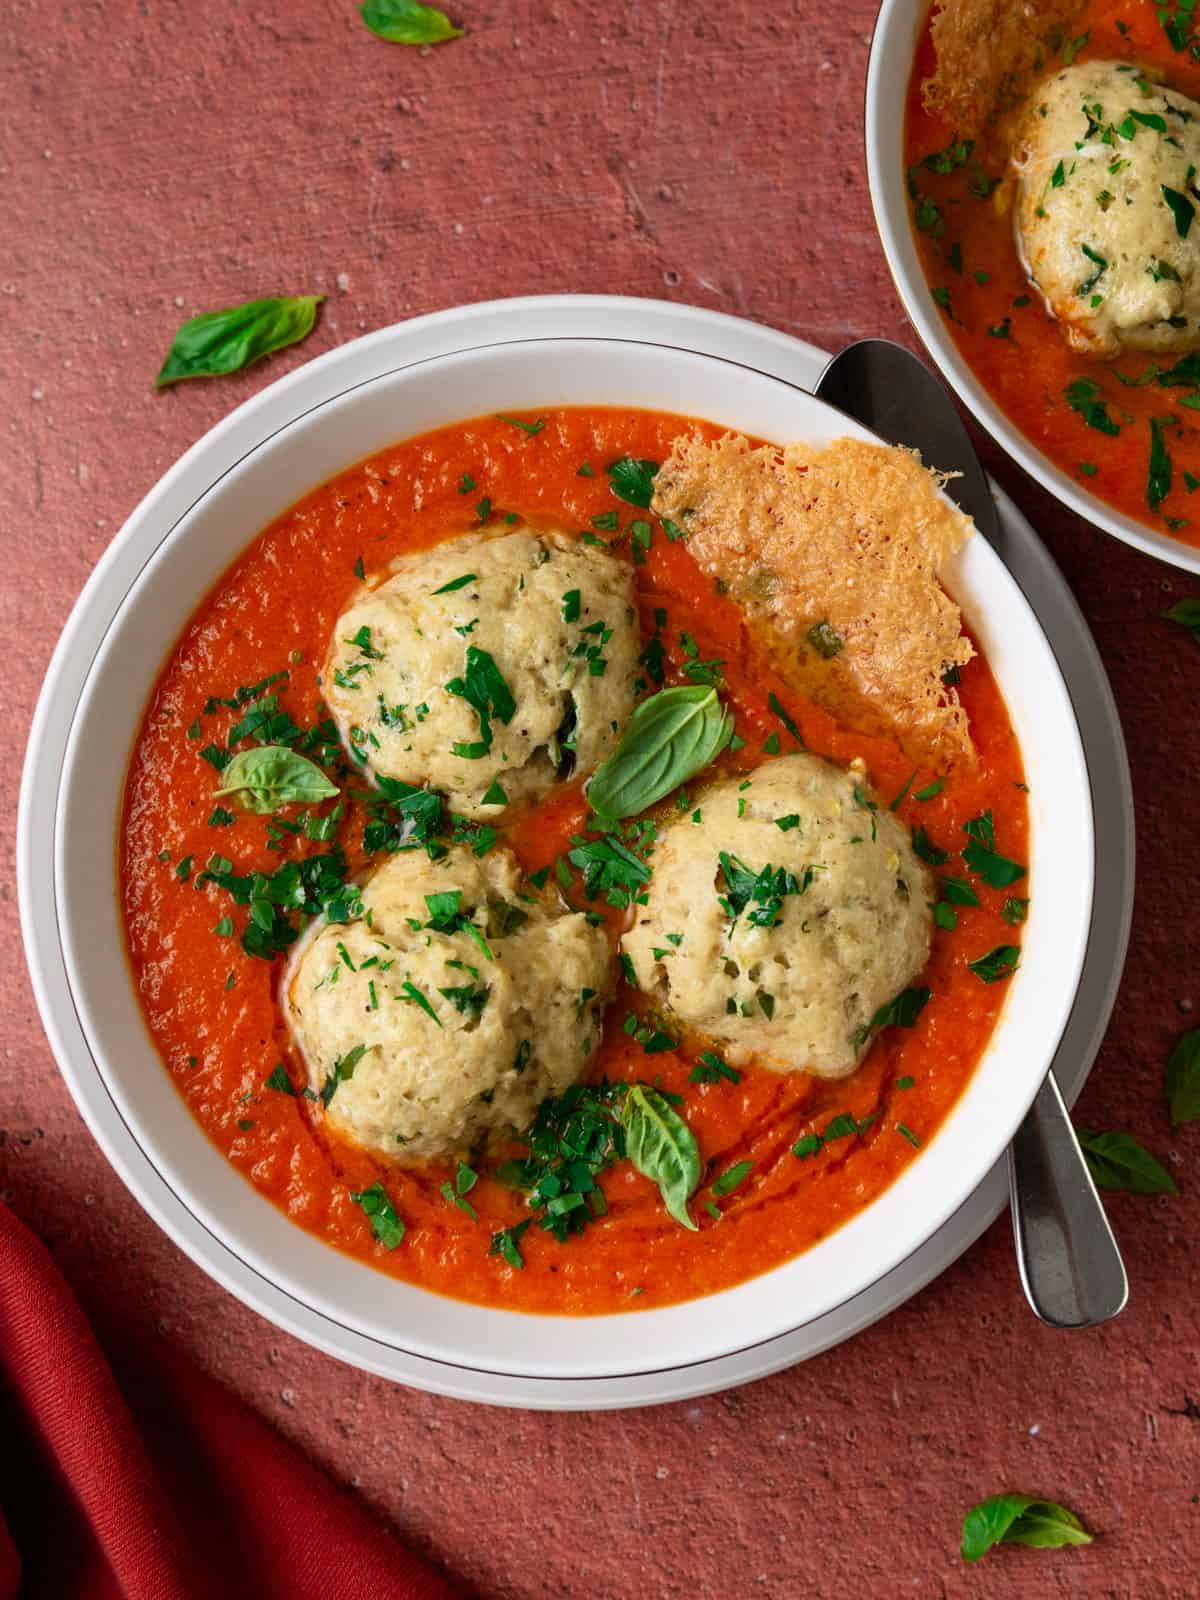 Cheesy matzo balls in roasted tomato soup with basil and Parmesan.